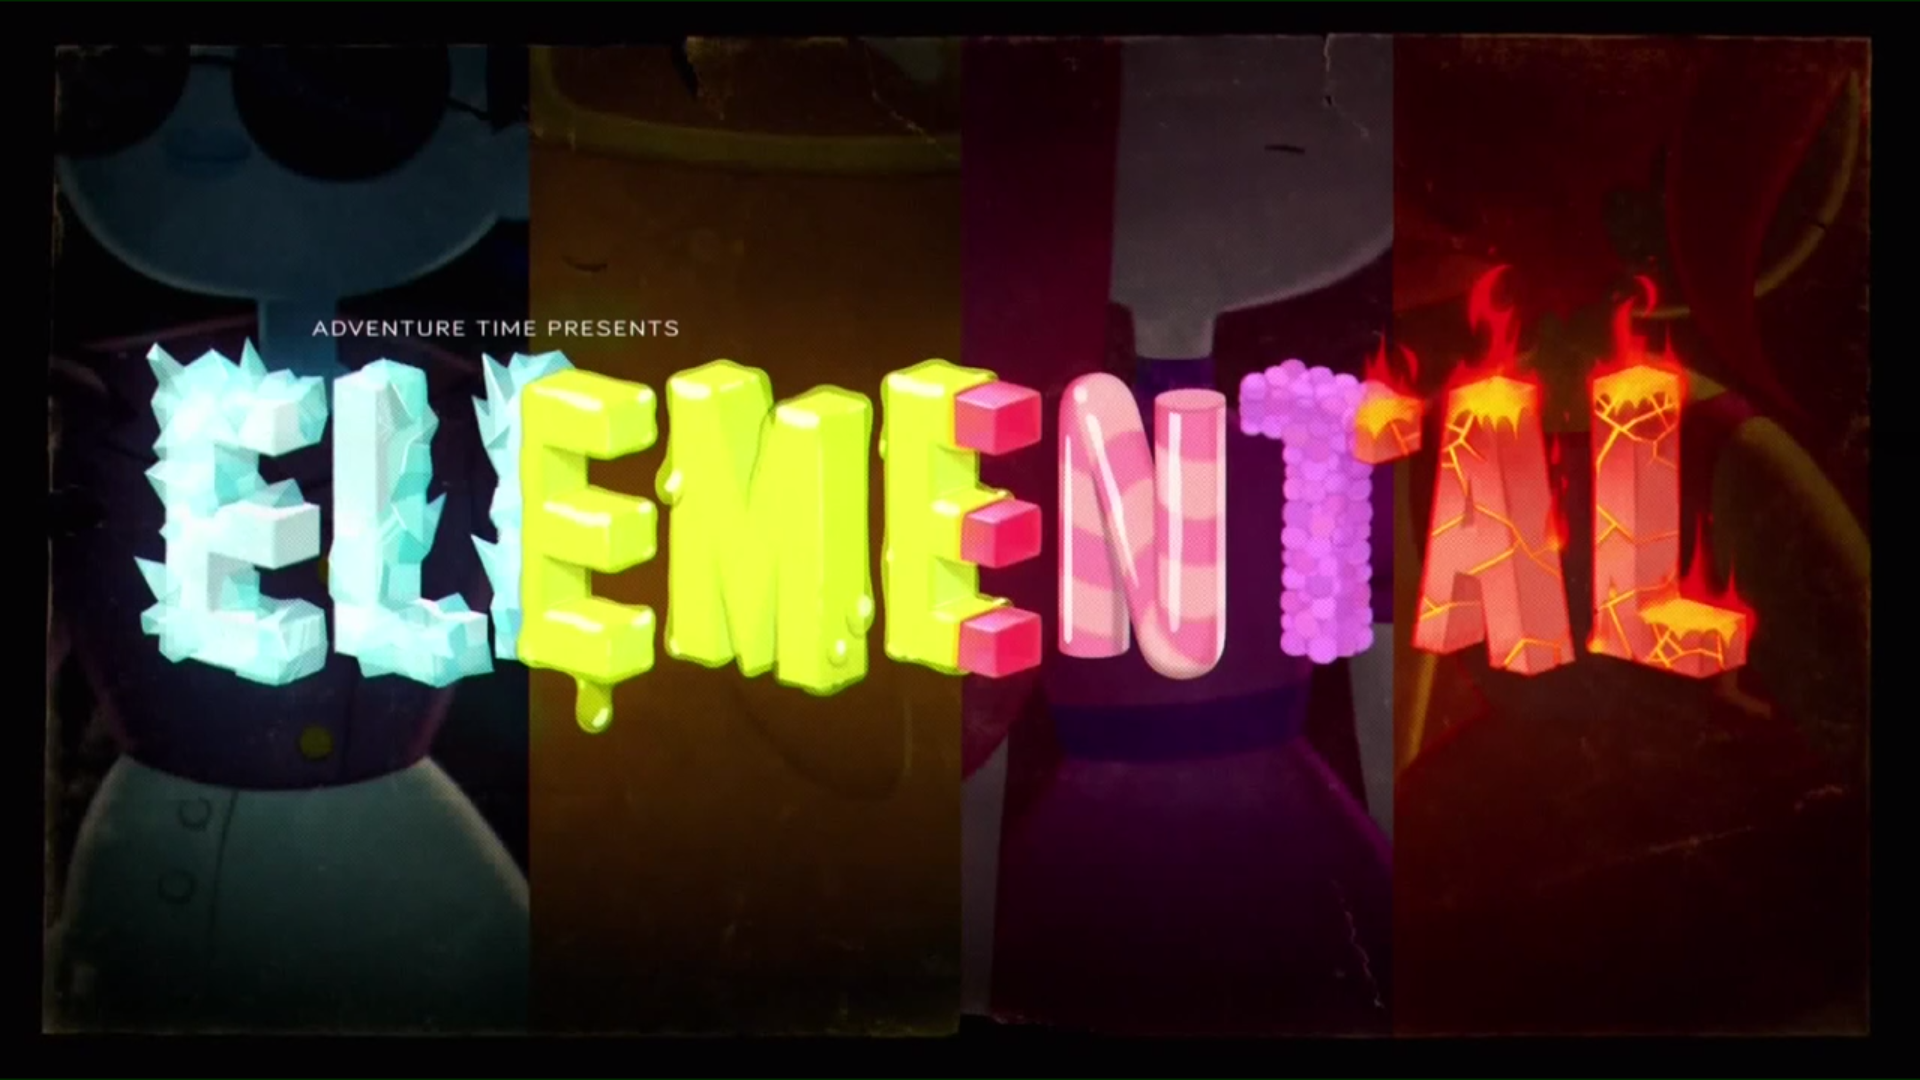 Title card to Adventure Time's "Elementals"